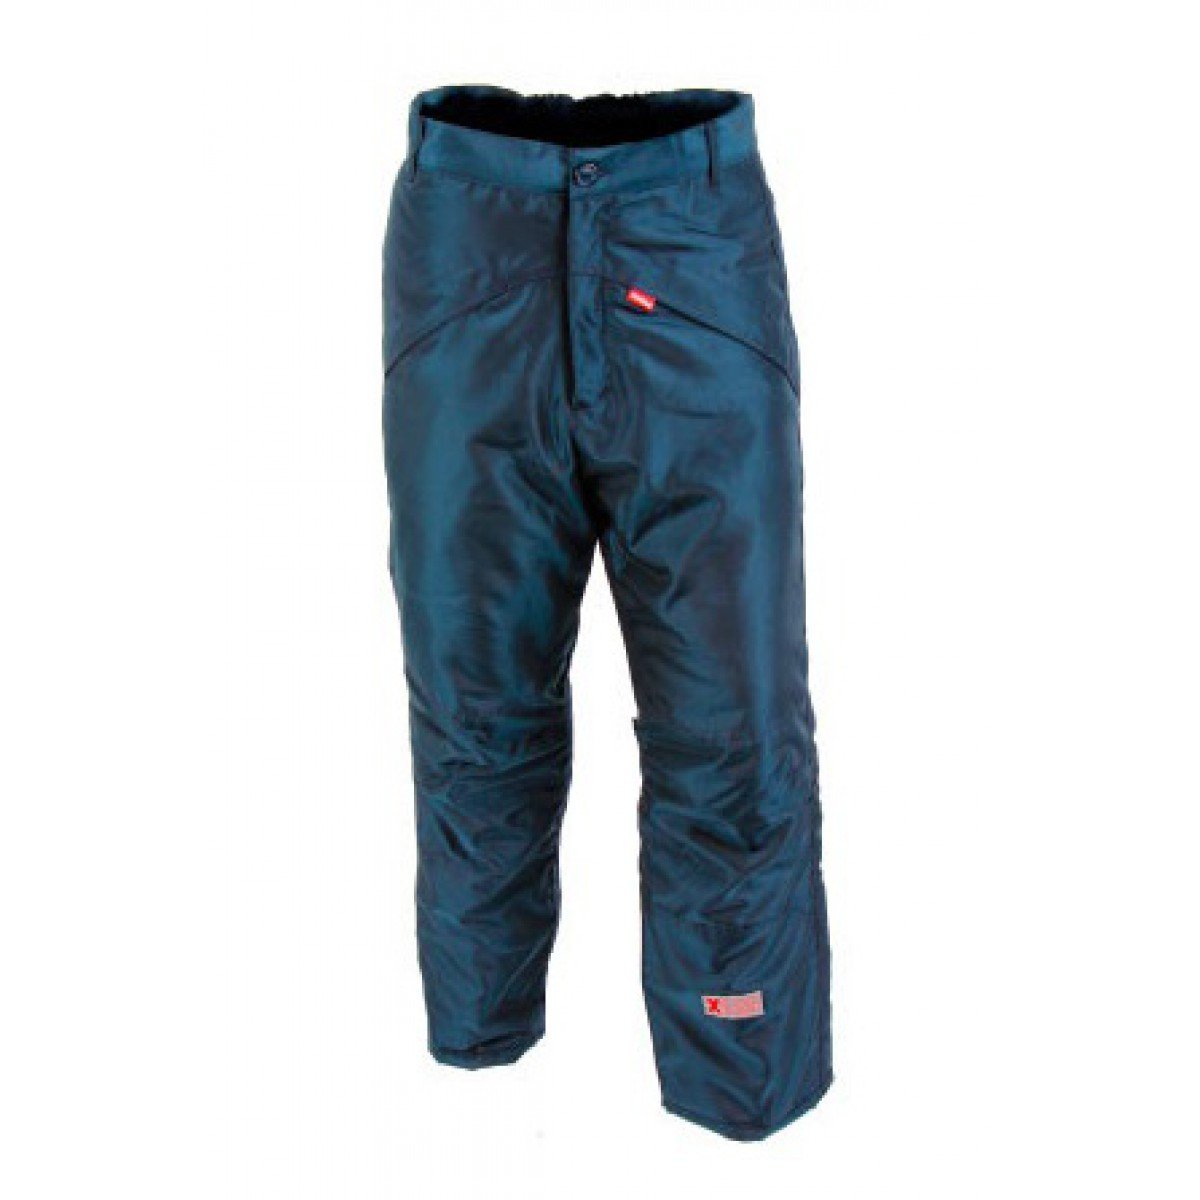 Flexitog Thermal Work Trousers